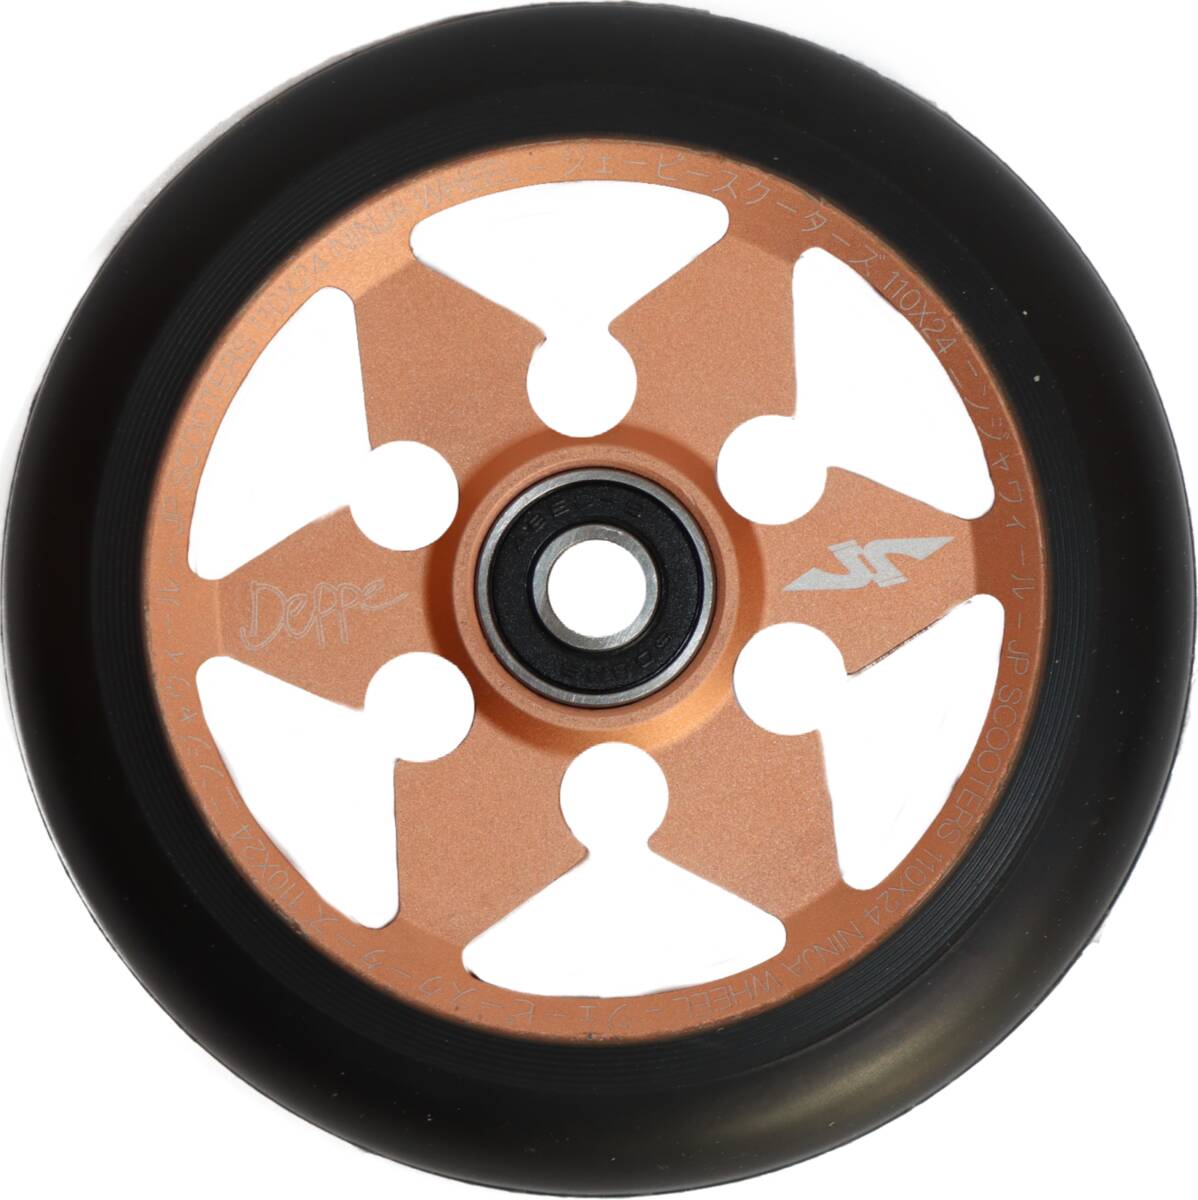 An image of JP Scooters Ninja Jeppe Nielsen Signature Scooter Wheels - 110mm